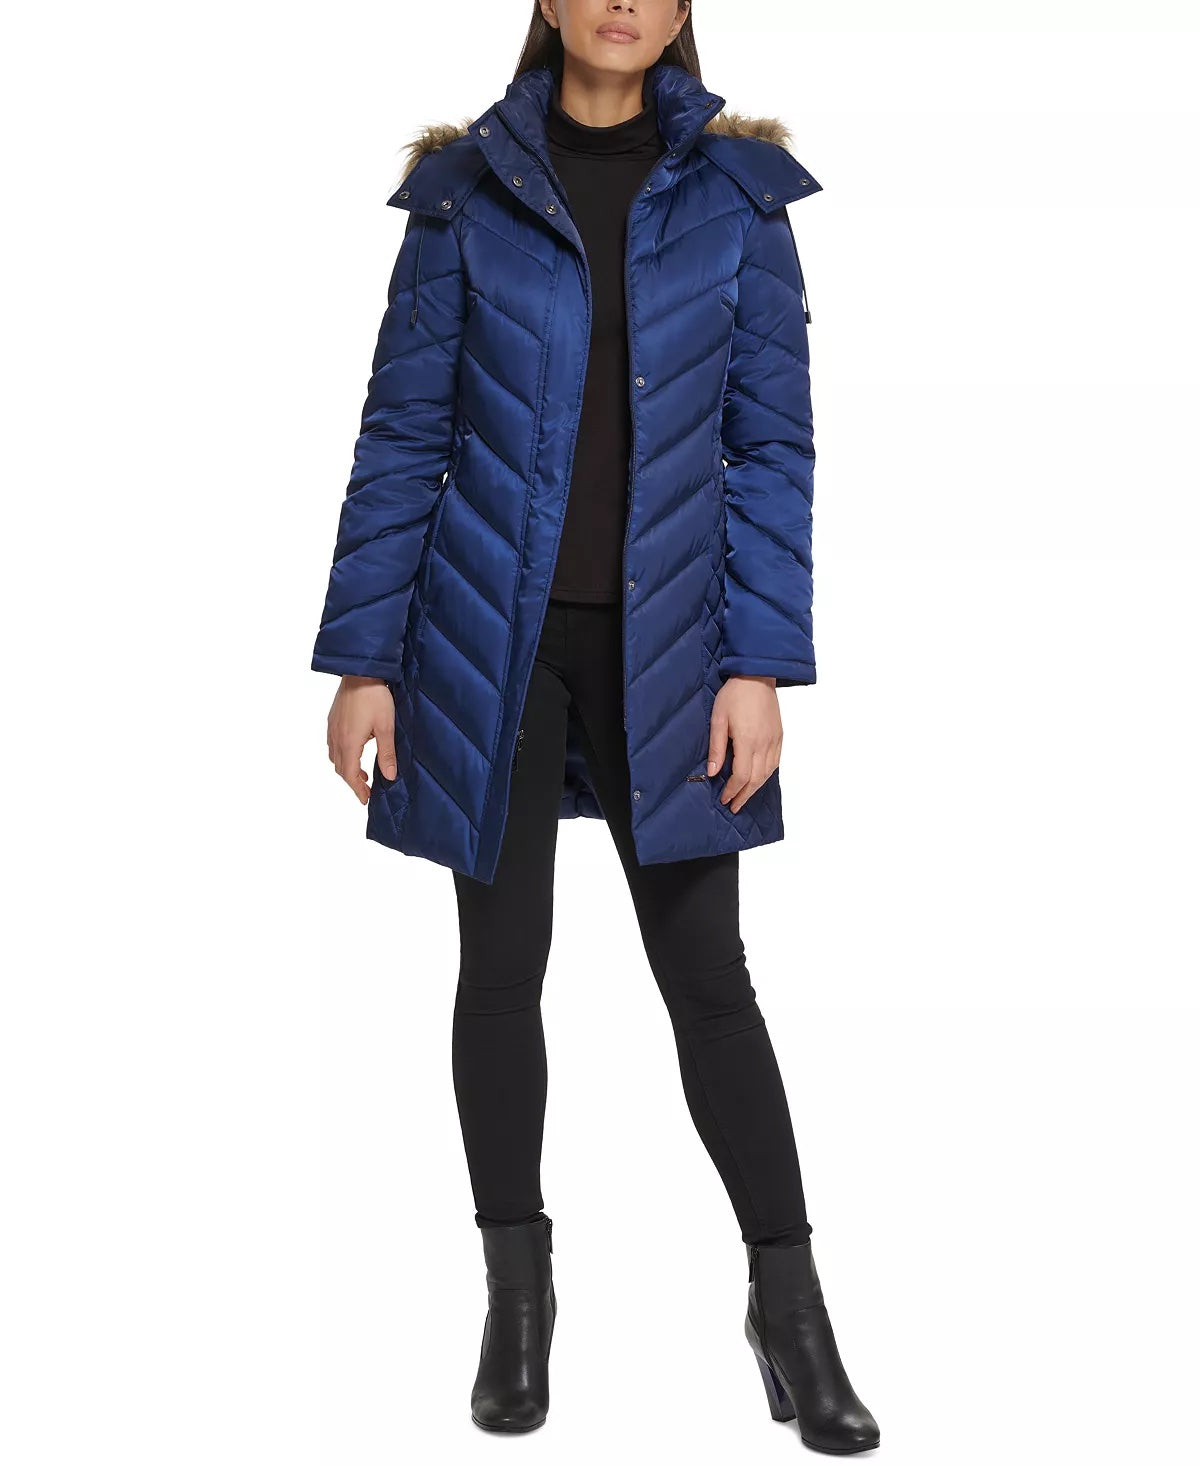 Kenneth Cole Women's Faux-Fur-Trim Hooded Puffer Coat Navy Blue Small